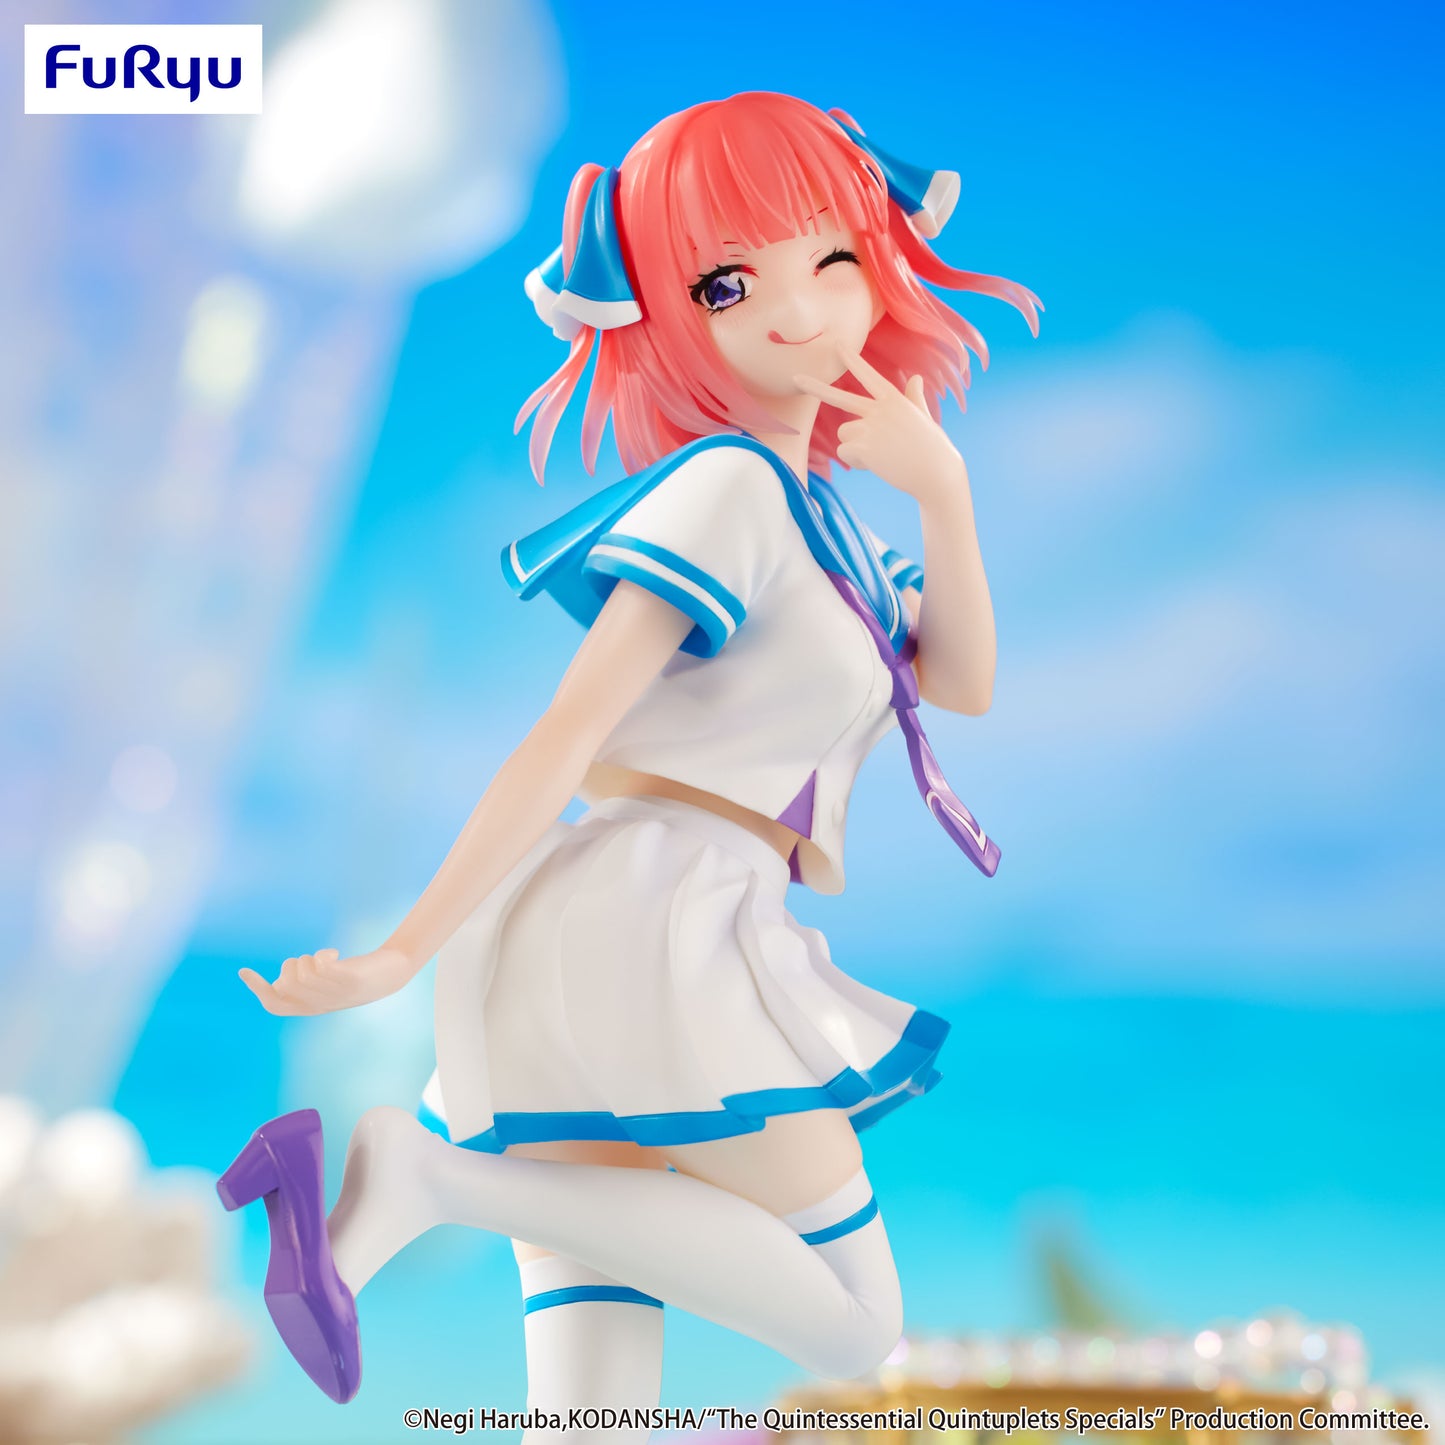 The Quintessential Quintuplets Specials Trio-Try-iT Figure